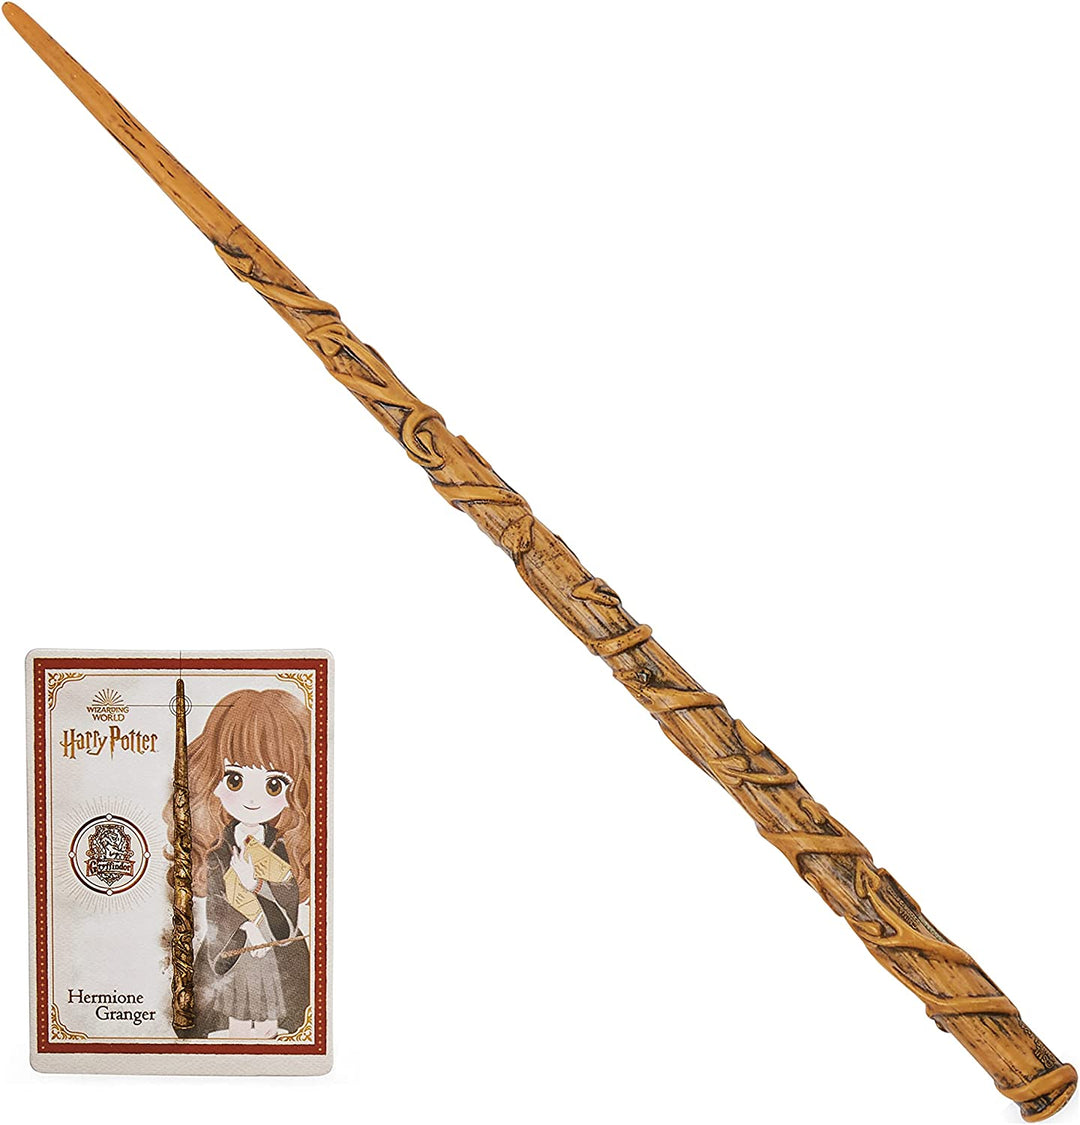 Wizarding World Authentic 30.5cm Spellbinding Hermione Granger Wand with Collect